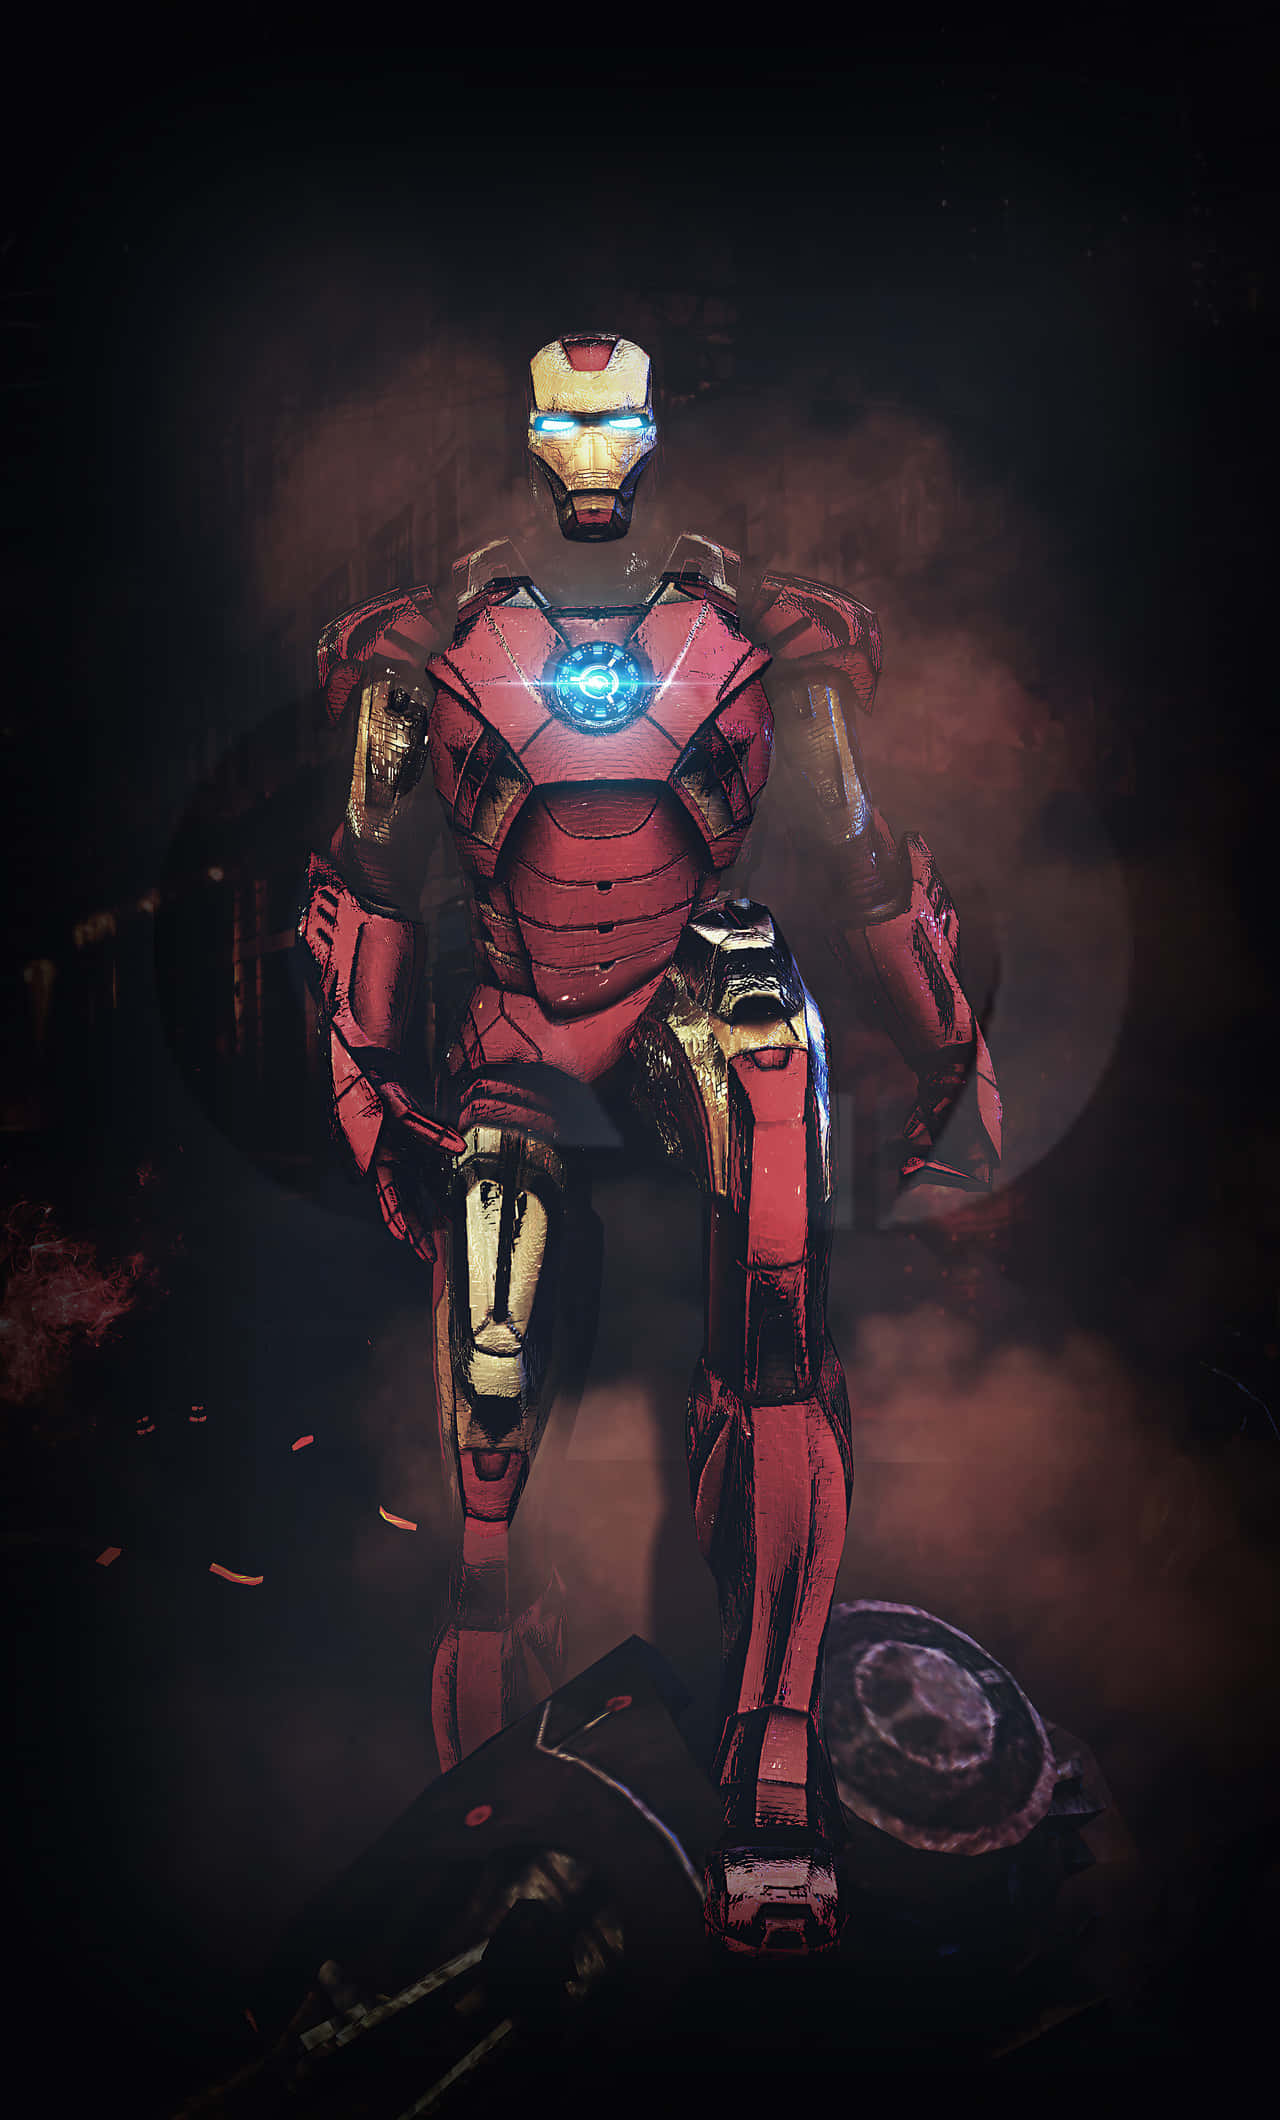 Show your love for Iron Man with this fan art! Wallpaper